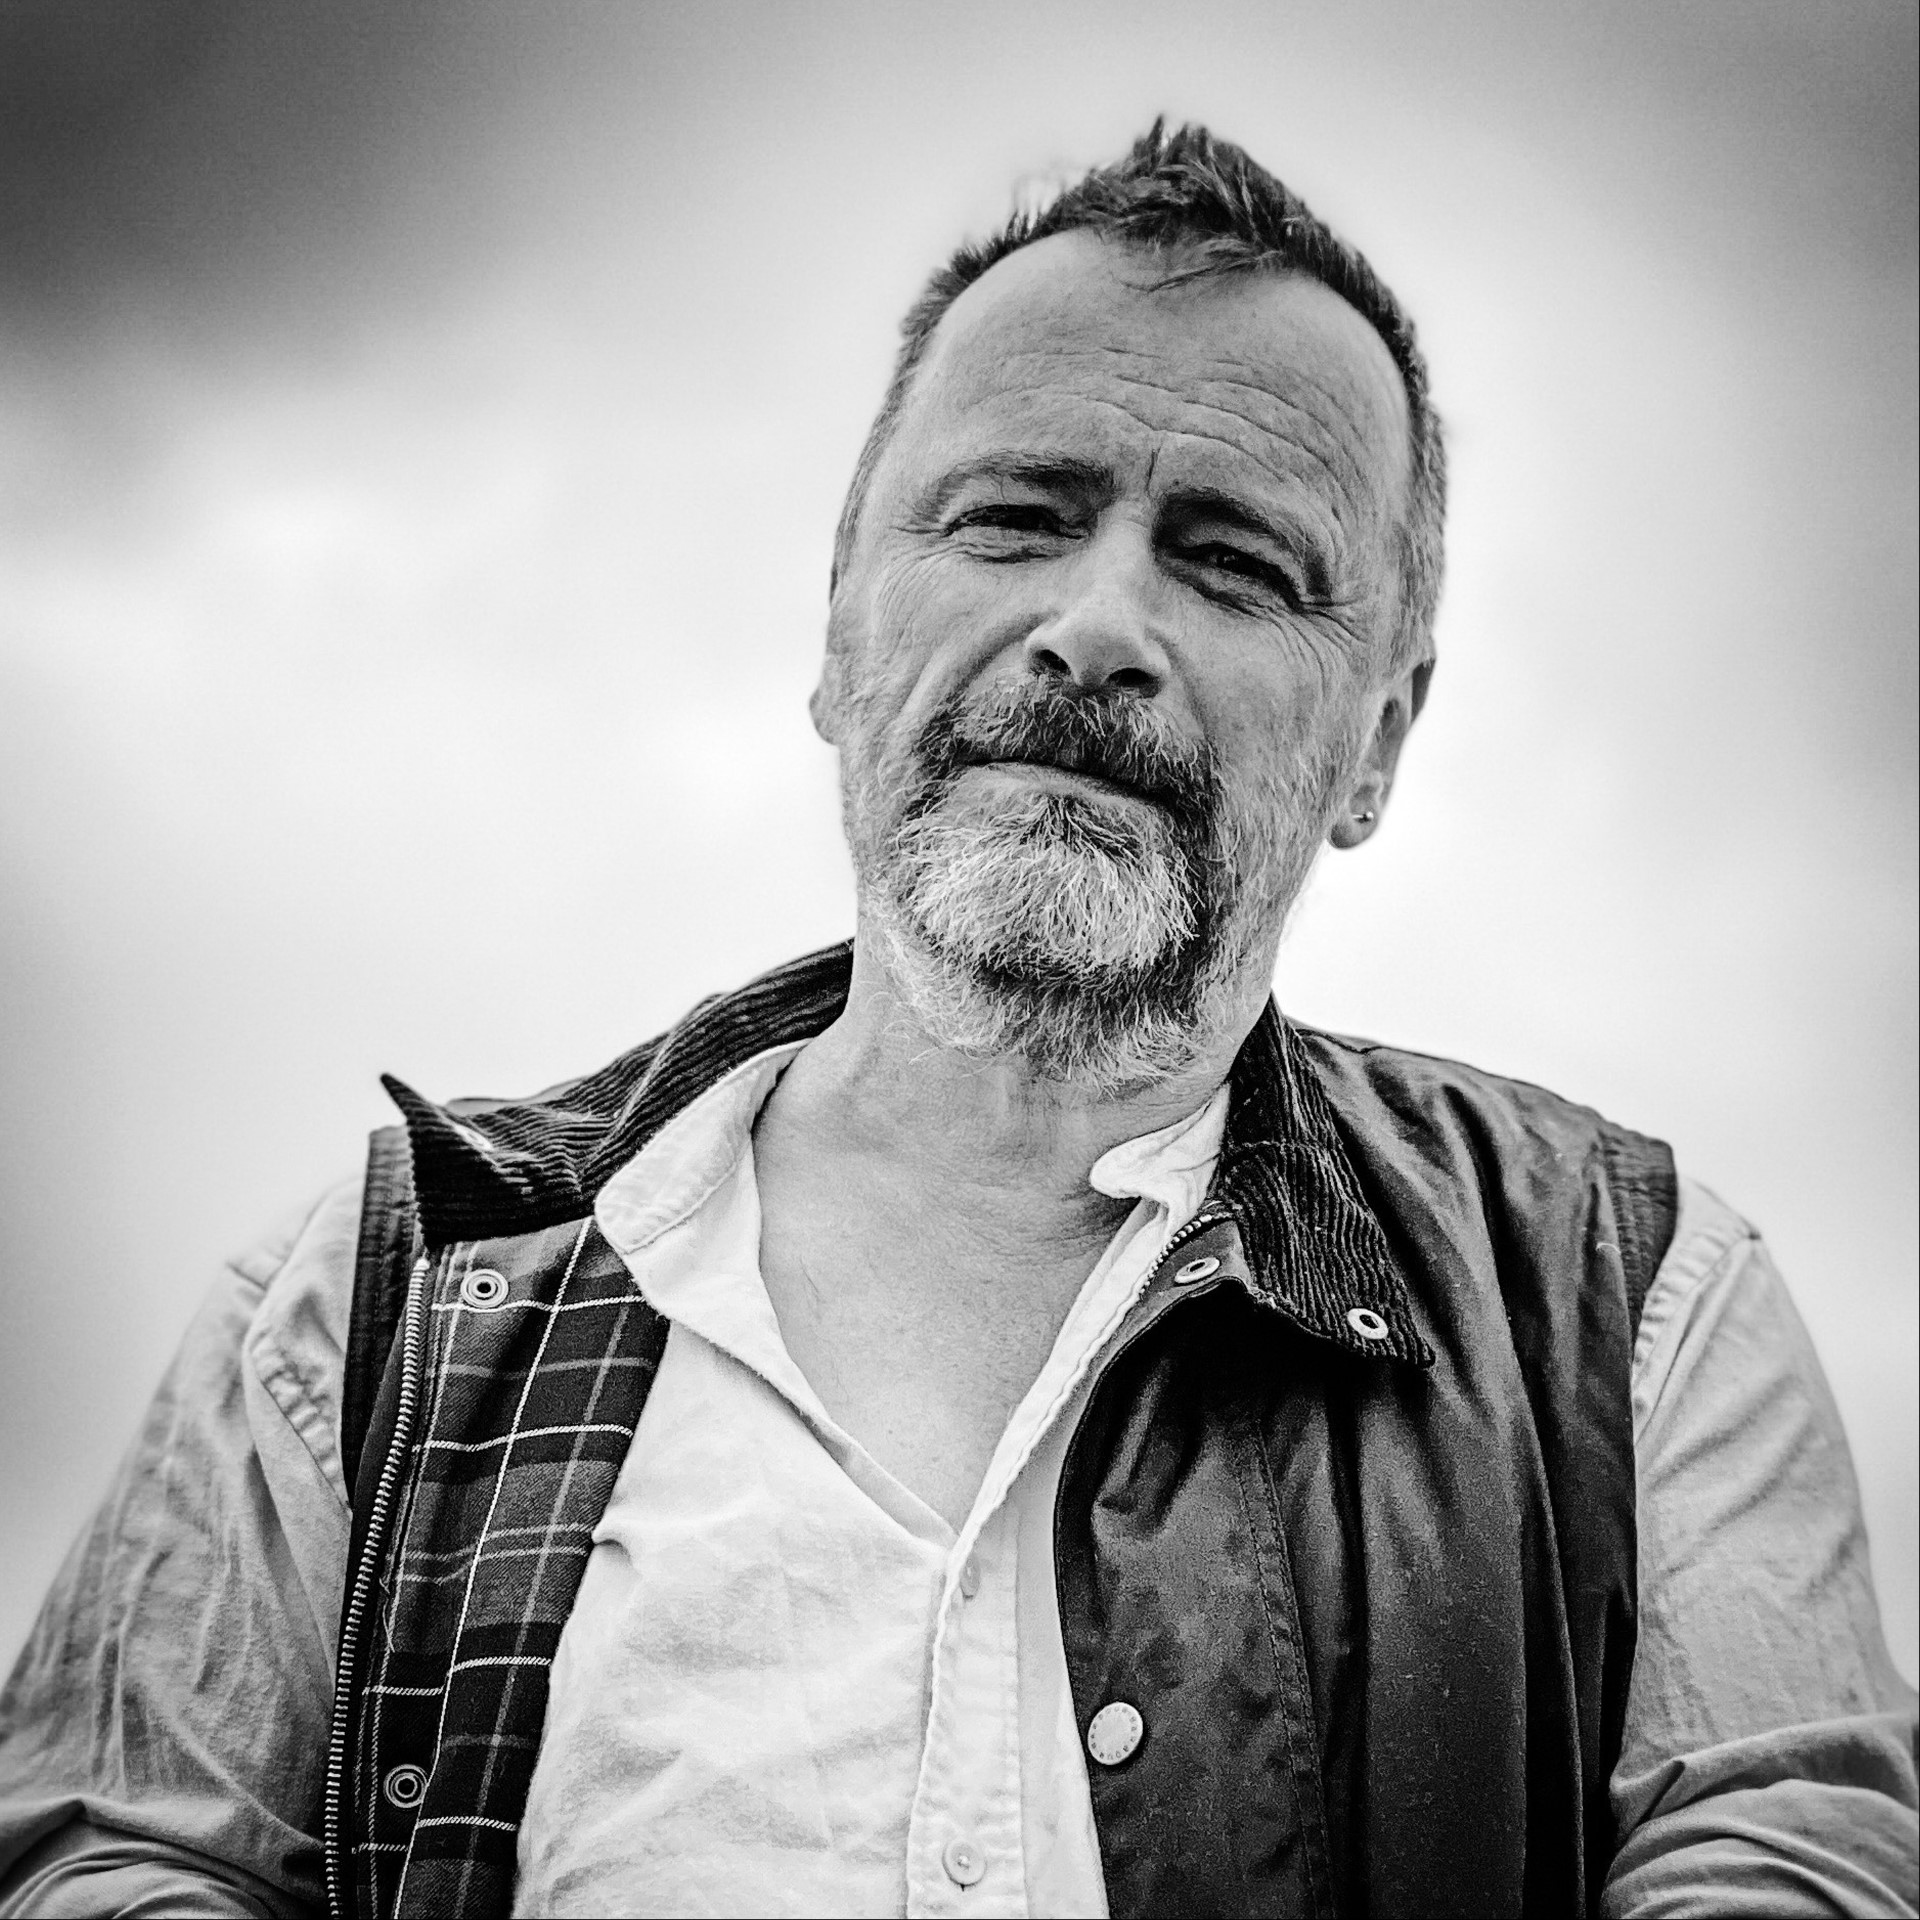 Hugh Warwick, author of Cull of the Wild, in a black and white photo wearing a shirt and gilet.